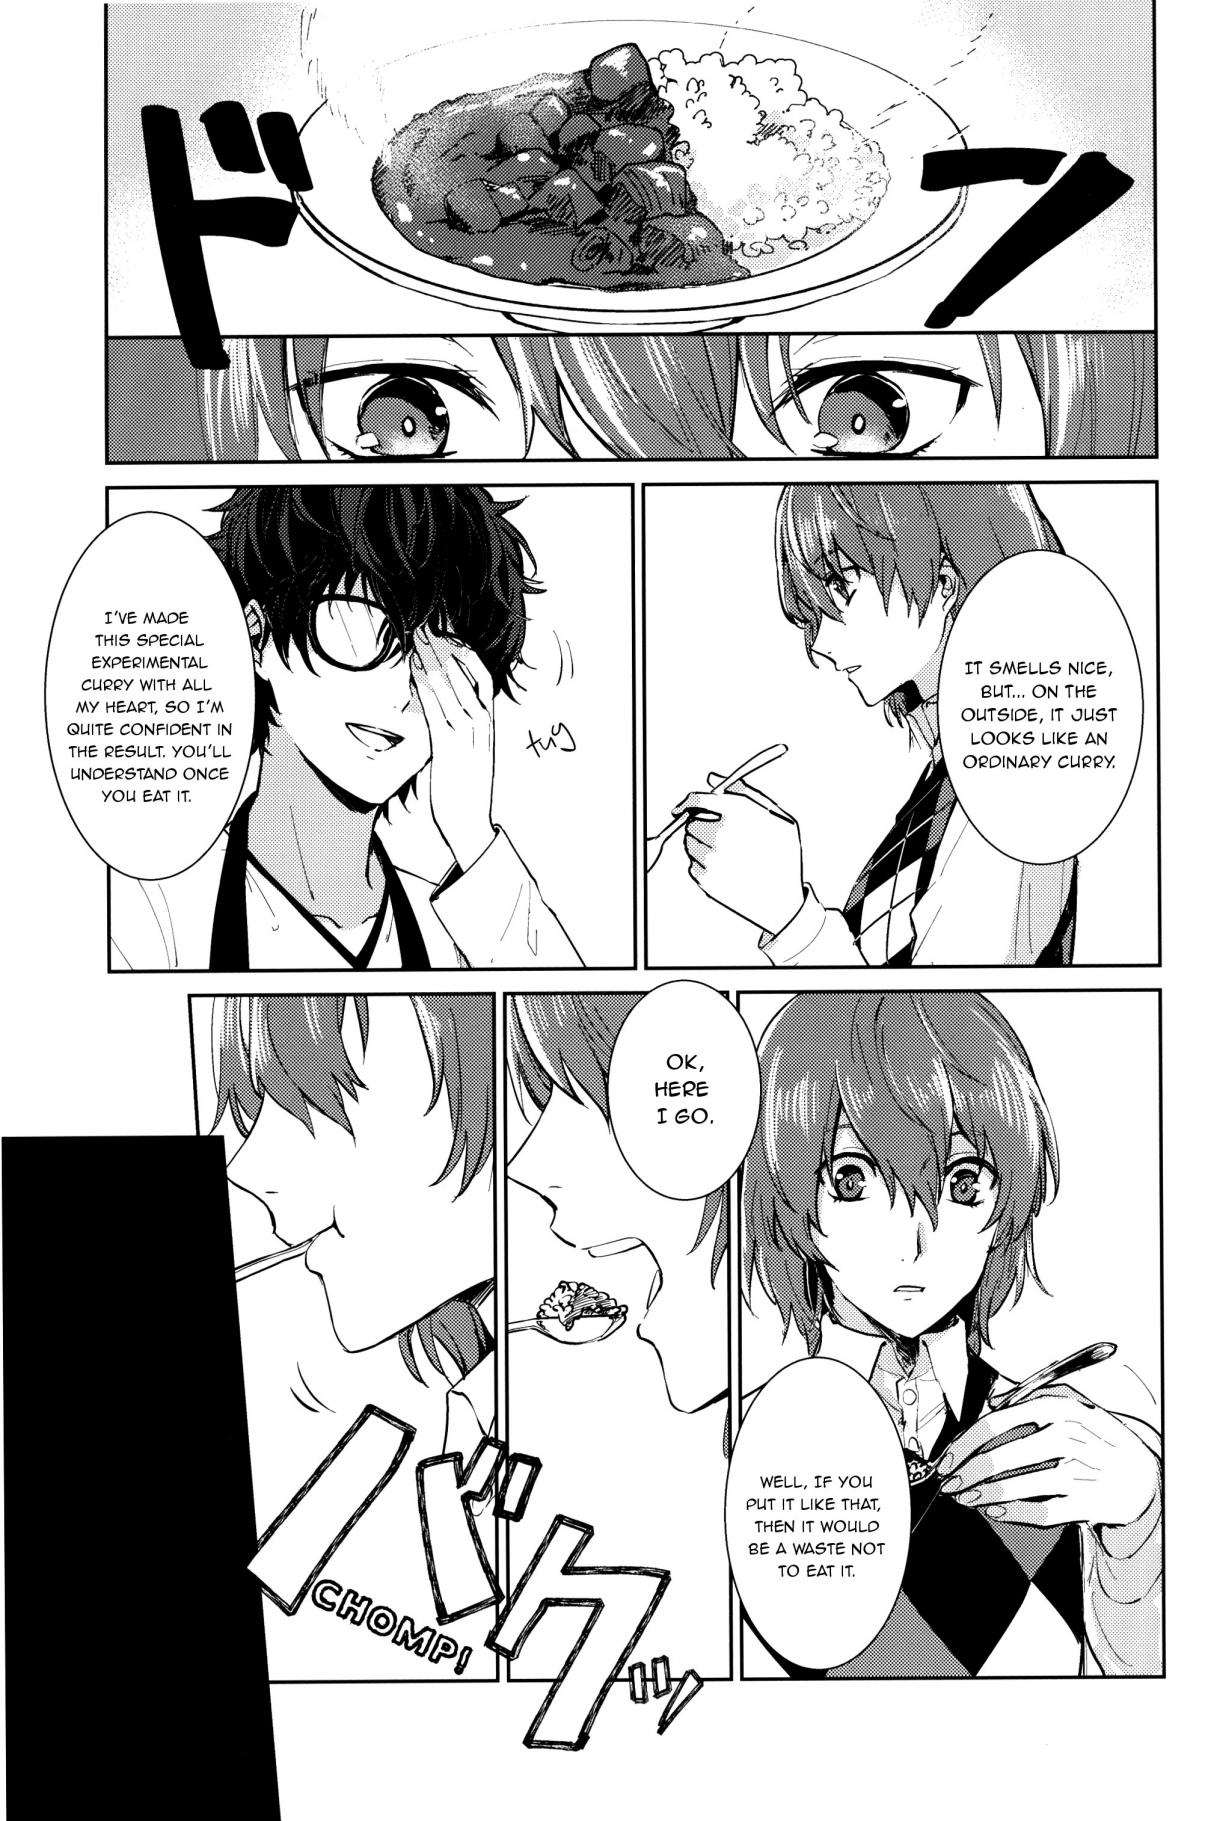 Persona 5 Character Anthology Ch. 9 Akechi san's recommendation